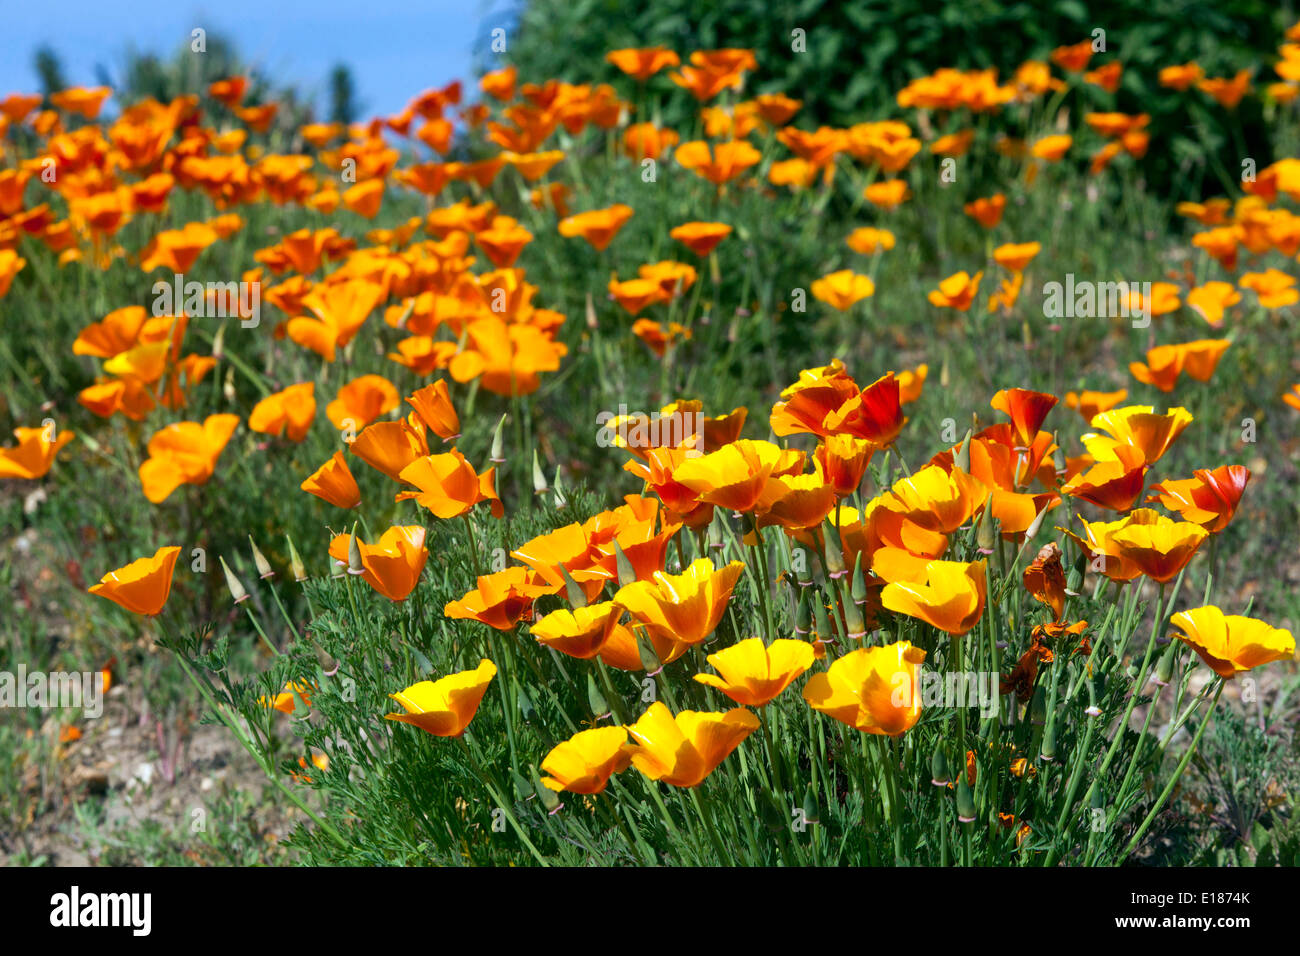 Eschscholzia californica Californian poppies Colorful Meadow Annuals Plants Orange Flowers Scenery Field Poppies May Flowering California poppy Stock Photo